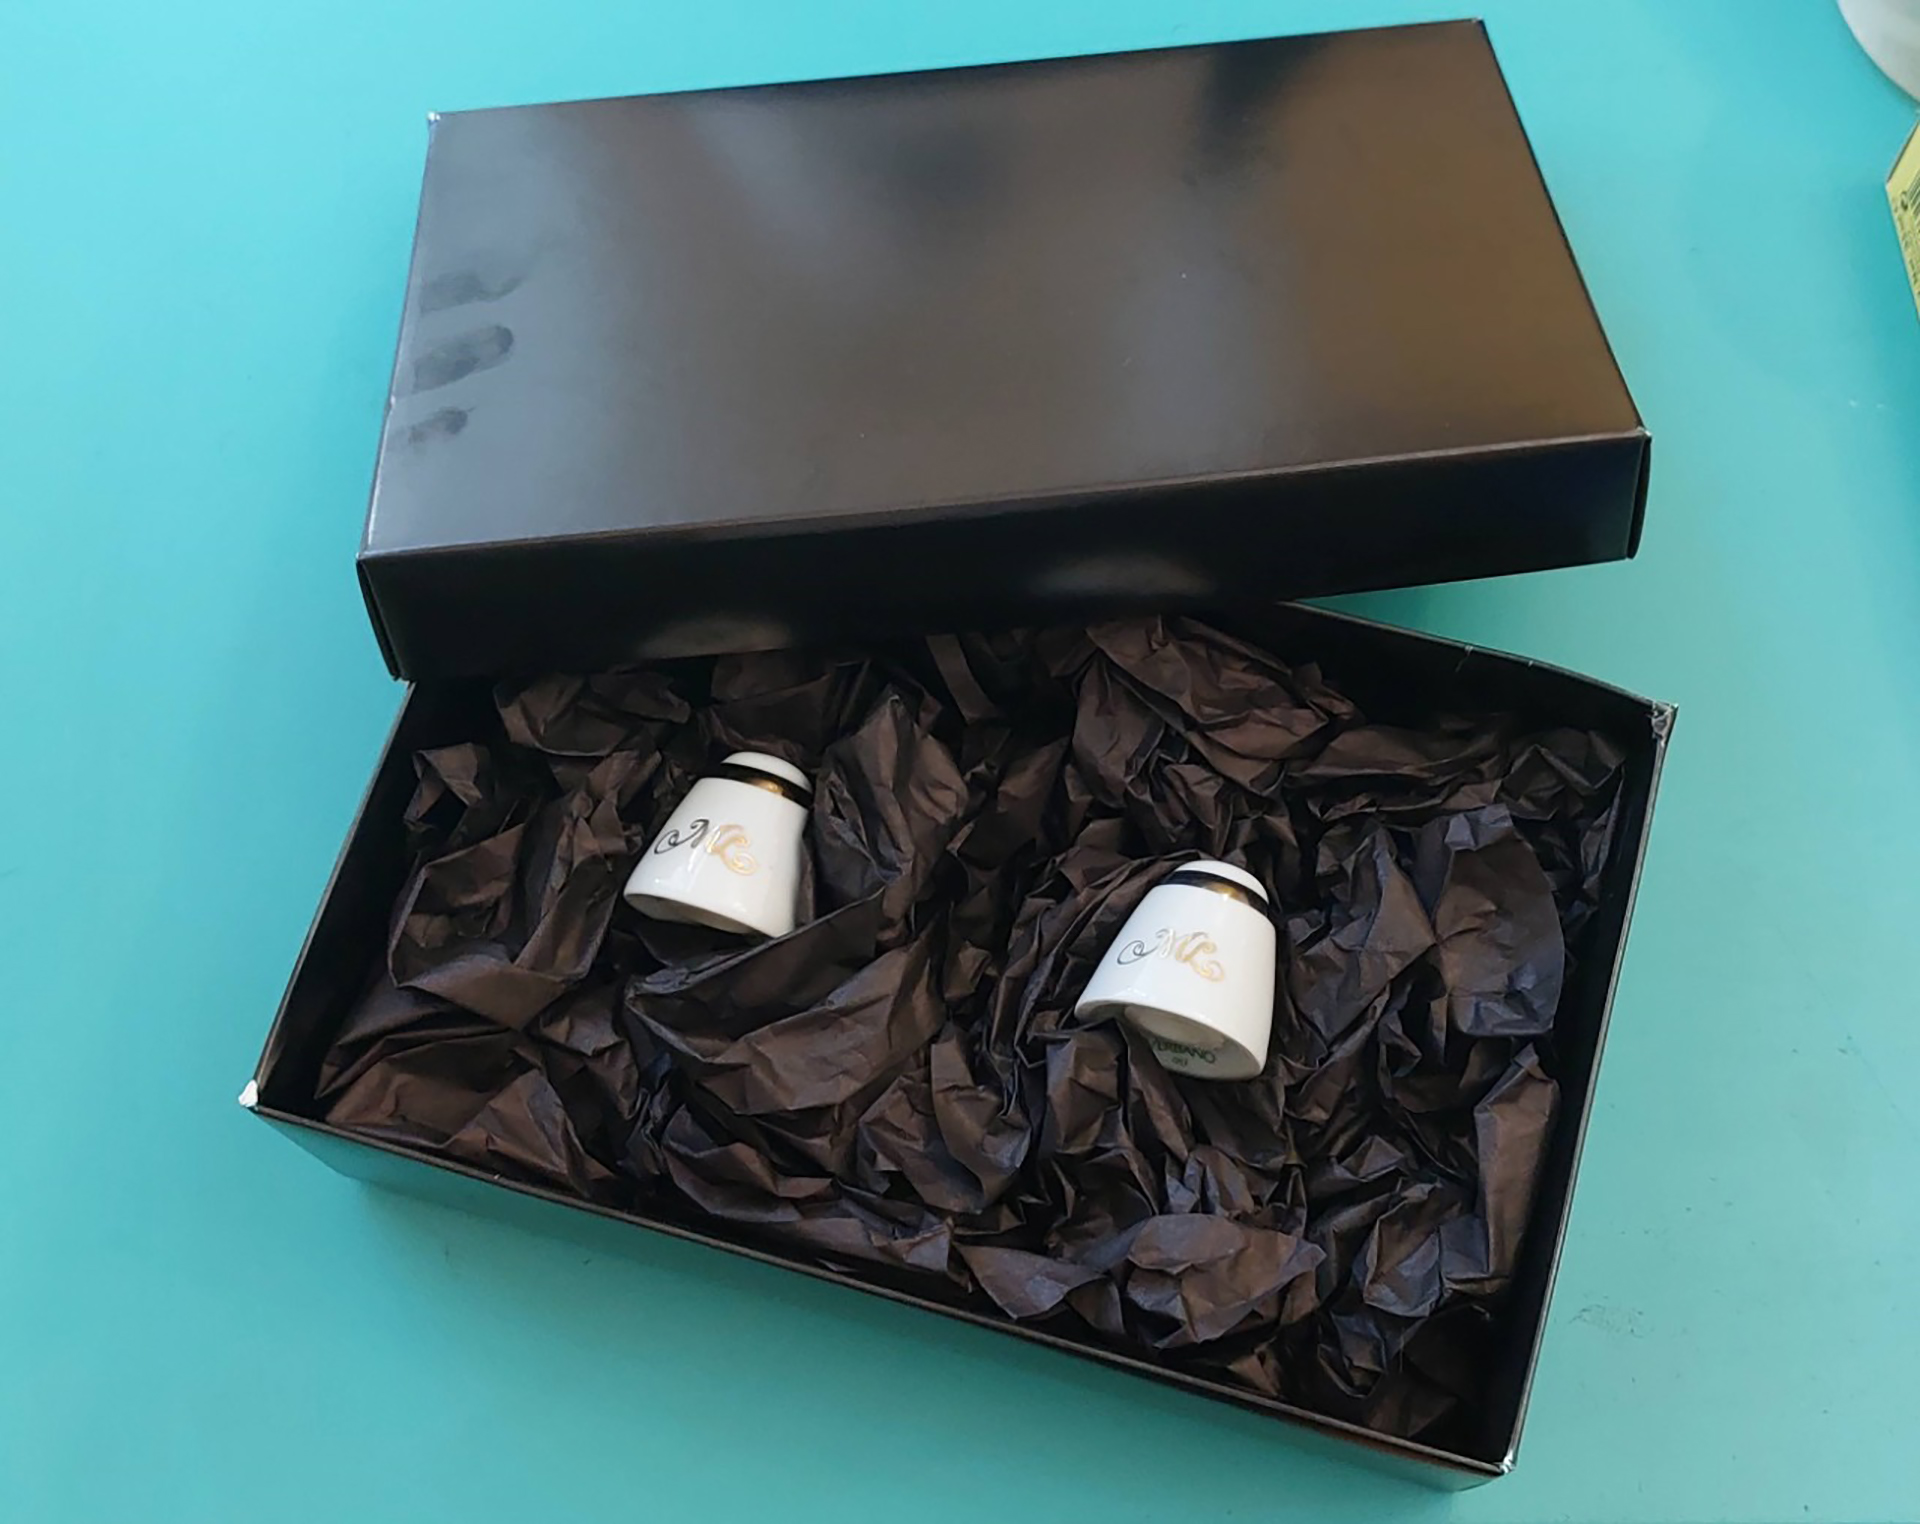 Daniel Malnatti put the ML salt shakers in a special black box for the buyer 